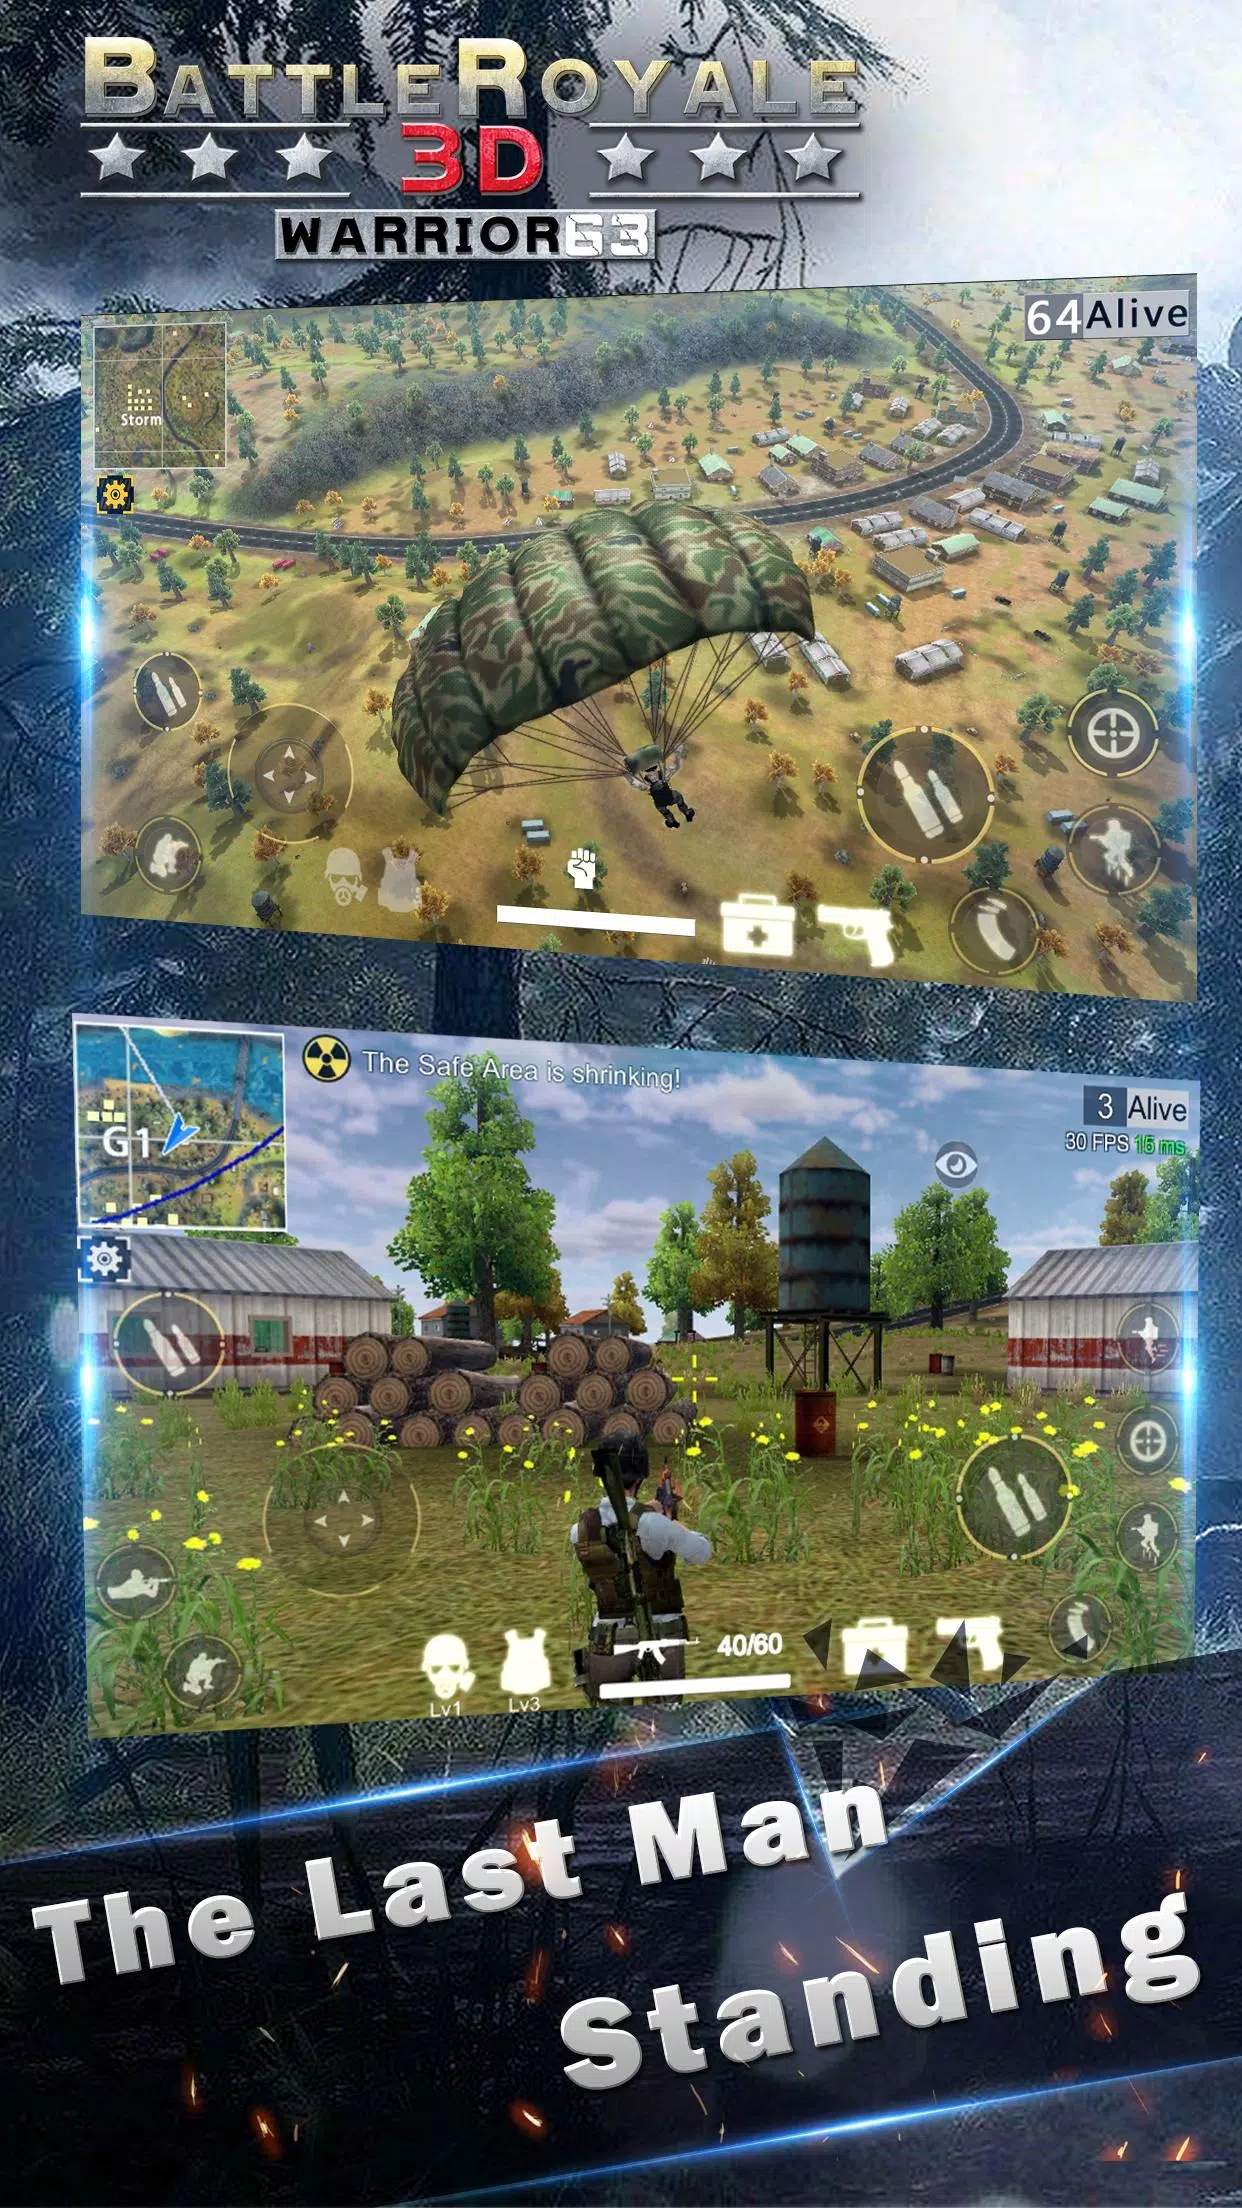 Battlefield Royale - The One Apk Download for Android- Latest